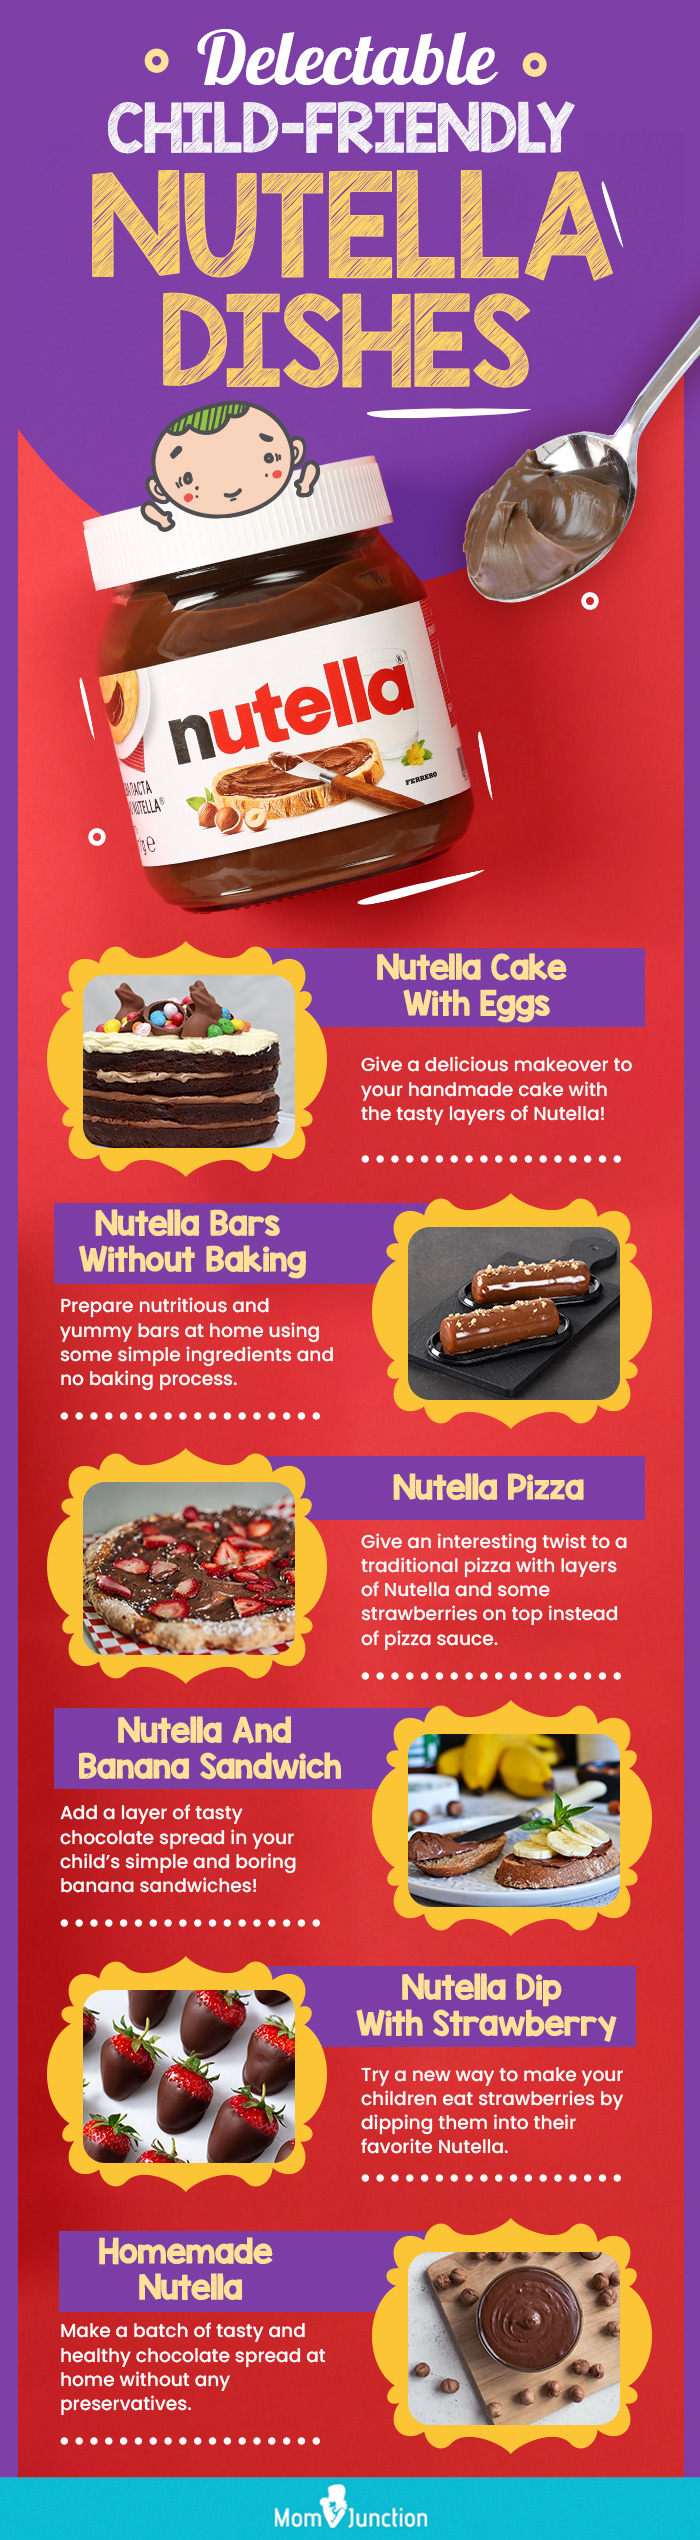 https://cdn2.momjunction.com/wp-content/uploads/2023/04/Delectable-Child-Friendly-Nutella-Dishes.jpg